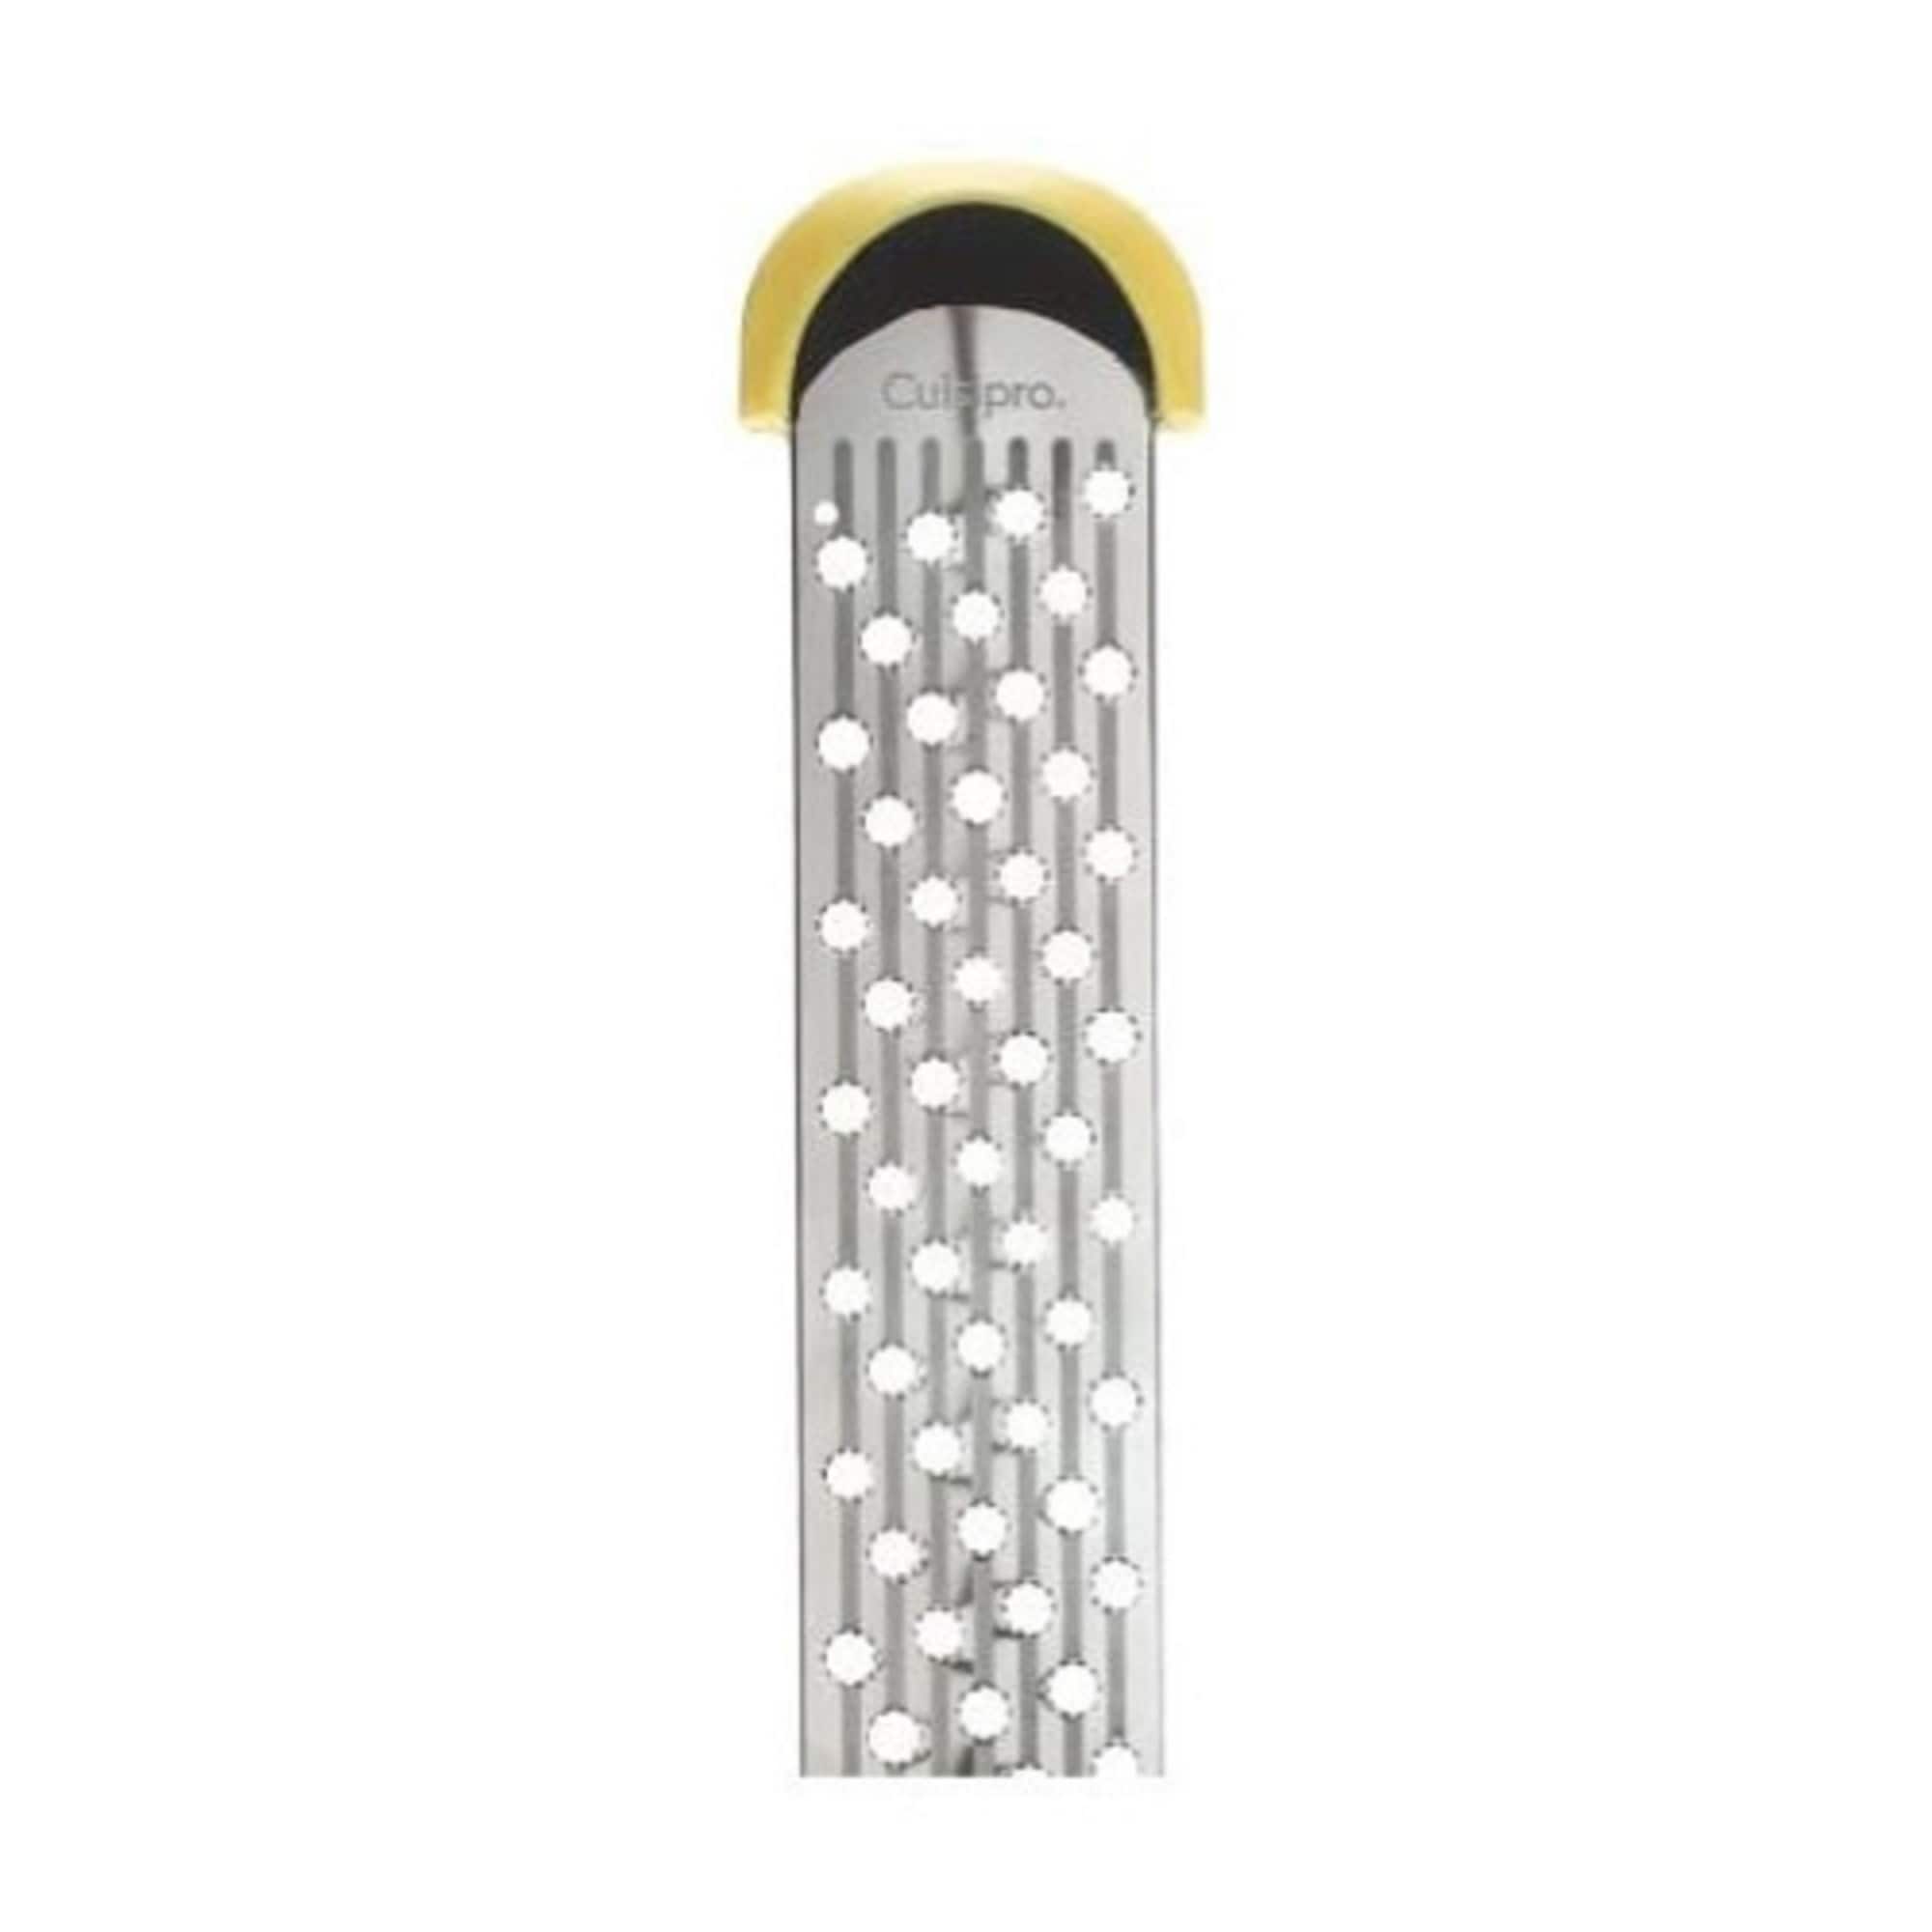 Cuisipro 4 Sided Box Grater w/Surface Glide Technology